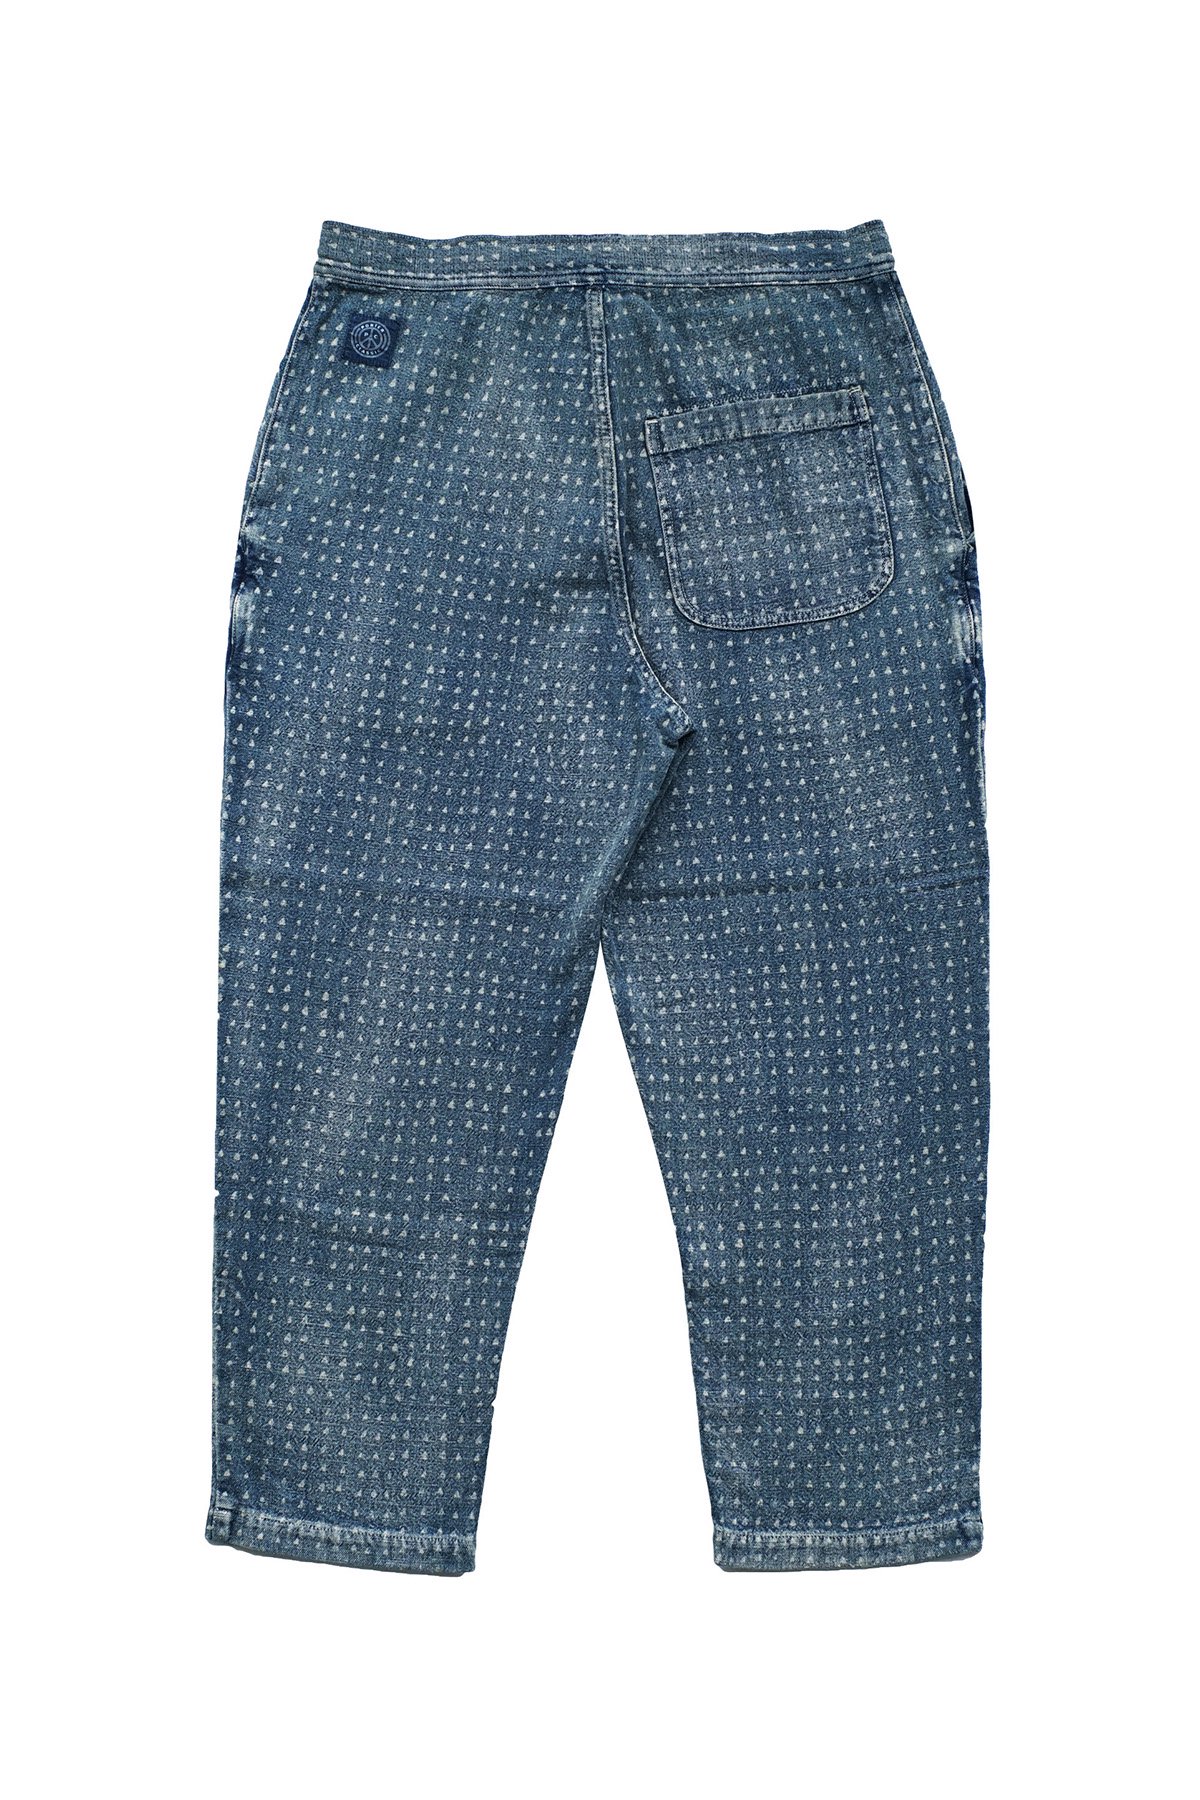 Porter Classic - AFRICAN COTTON PANTS 2019 - BLUE ポーター 